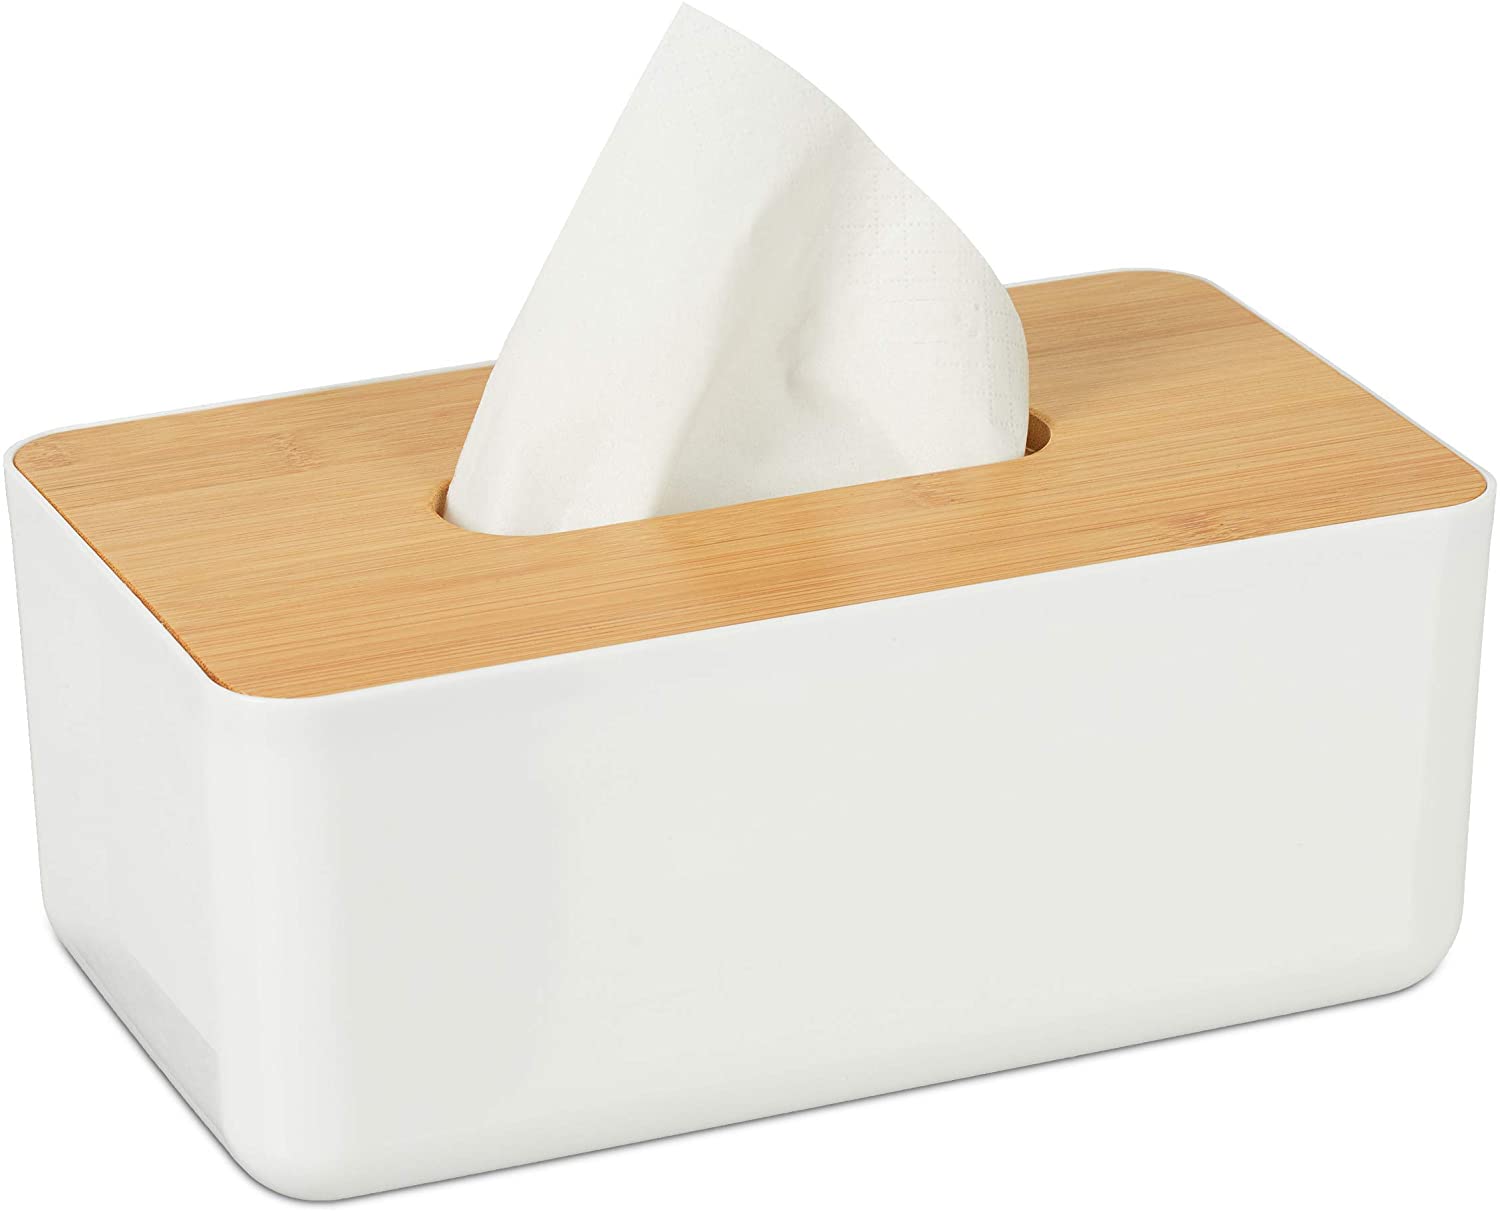 Relaxdays Bamboo Bathroom Tissue Box With Lid Modern Design Plastic Height 